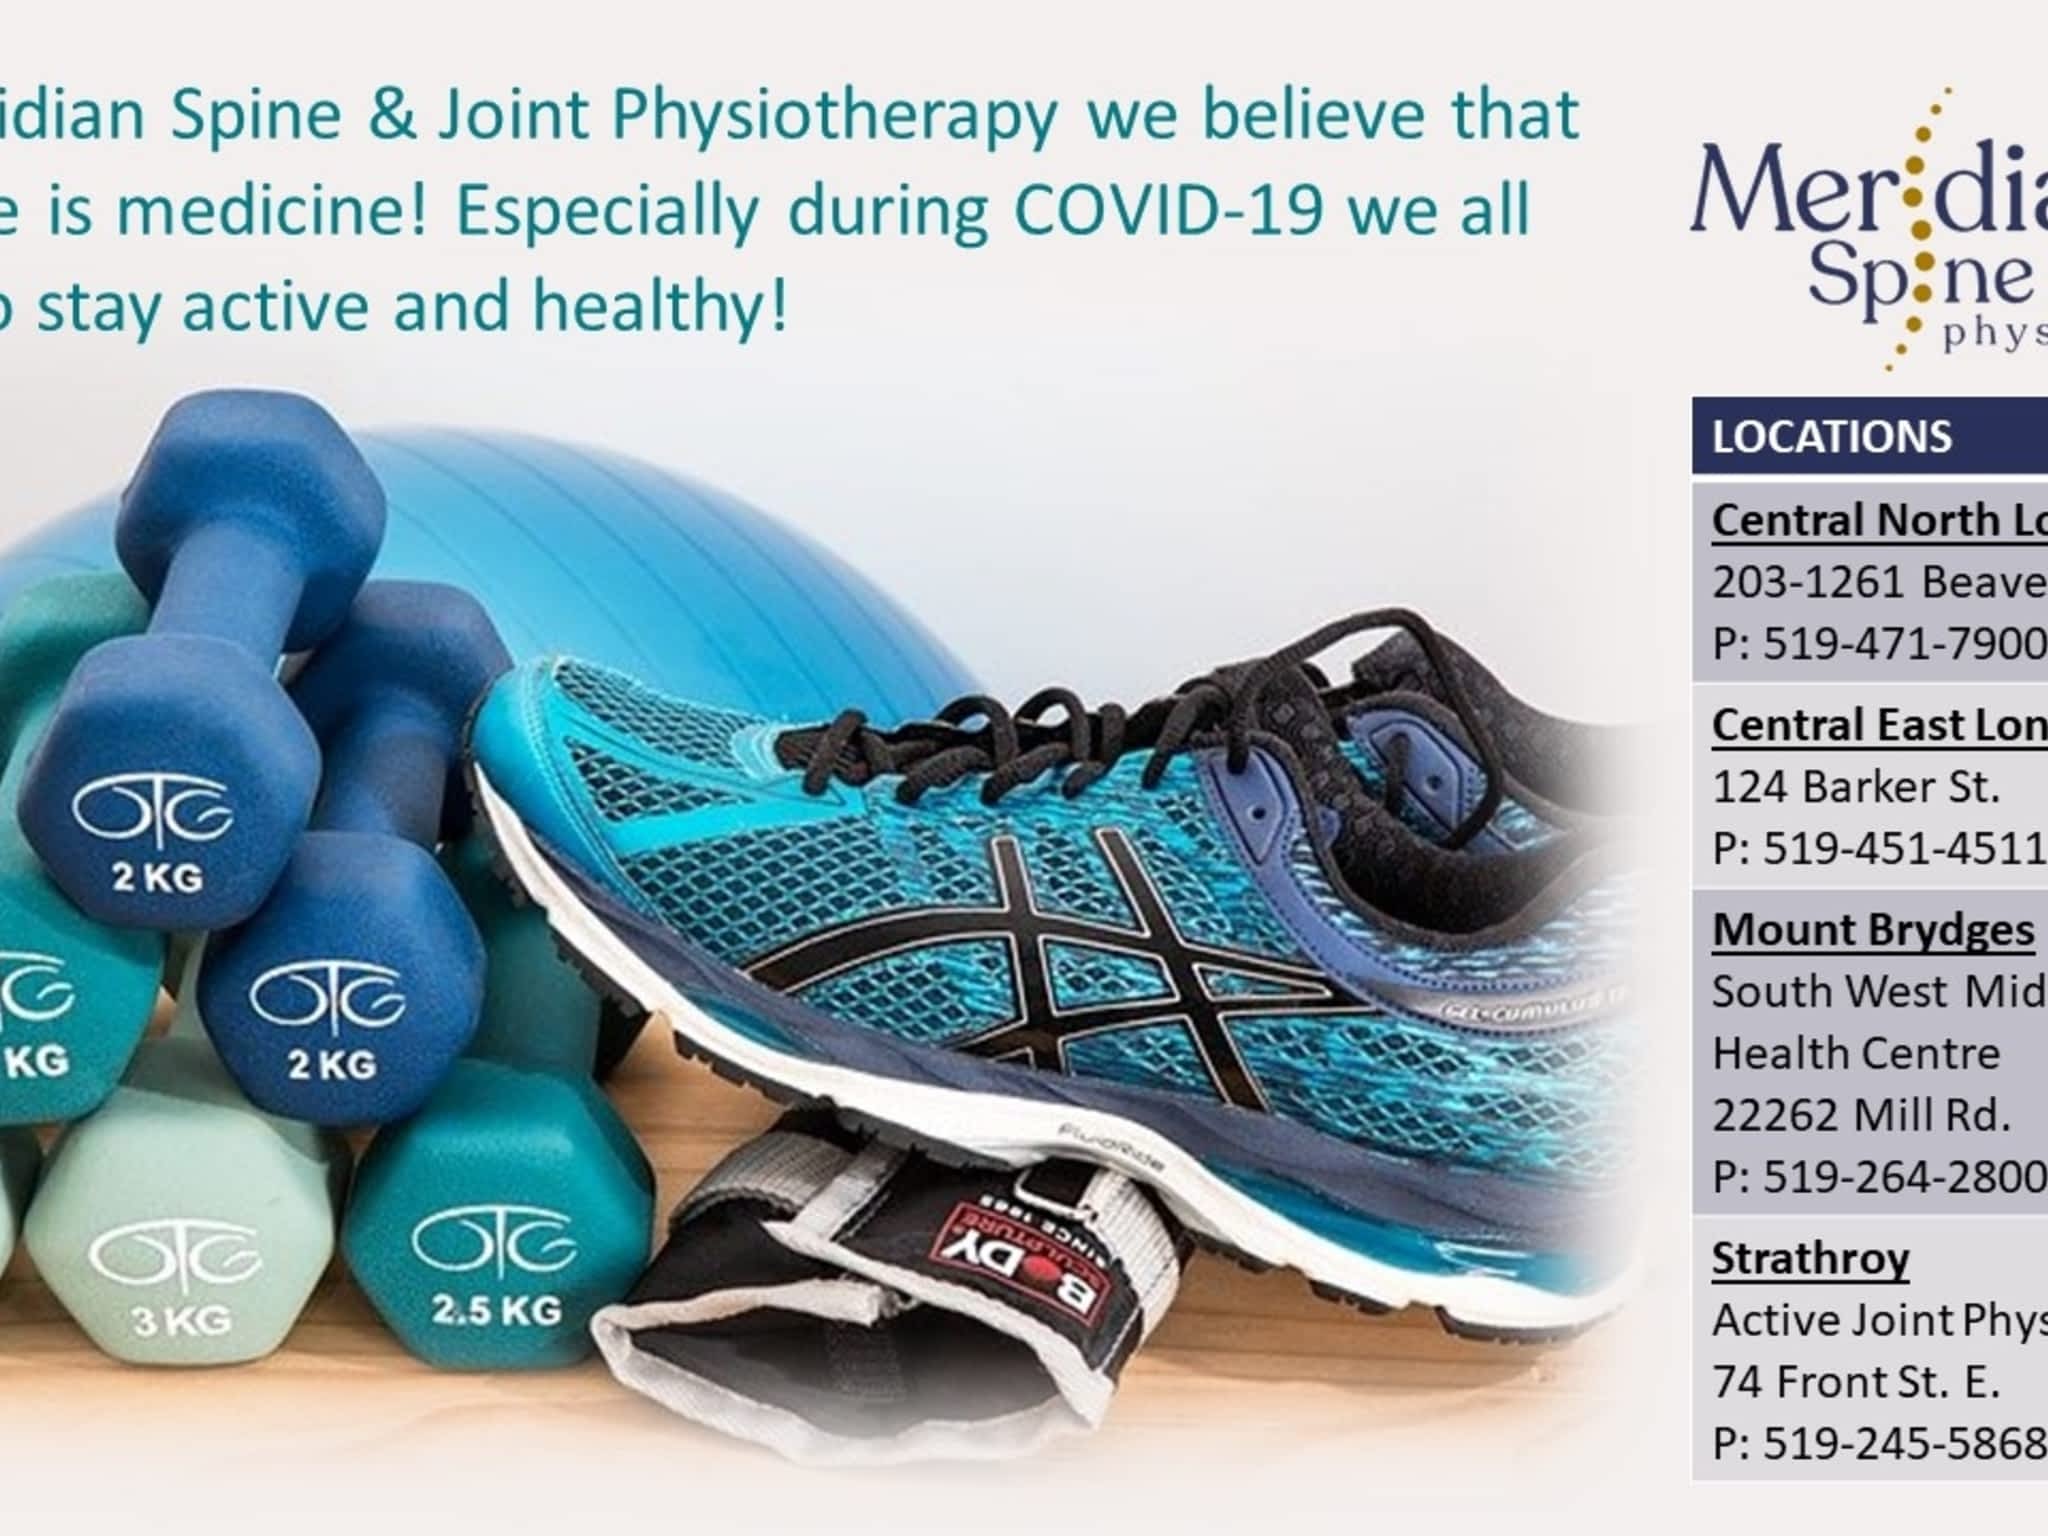 photo Meridian Spine & Joint Physiotherapy